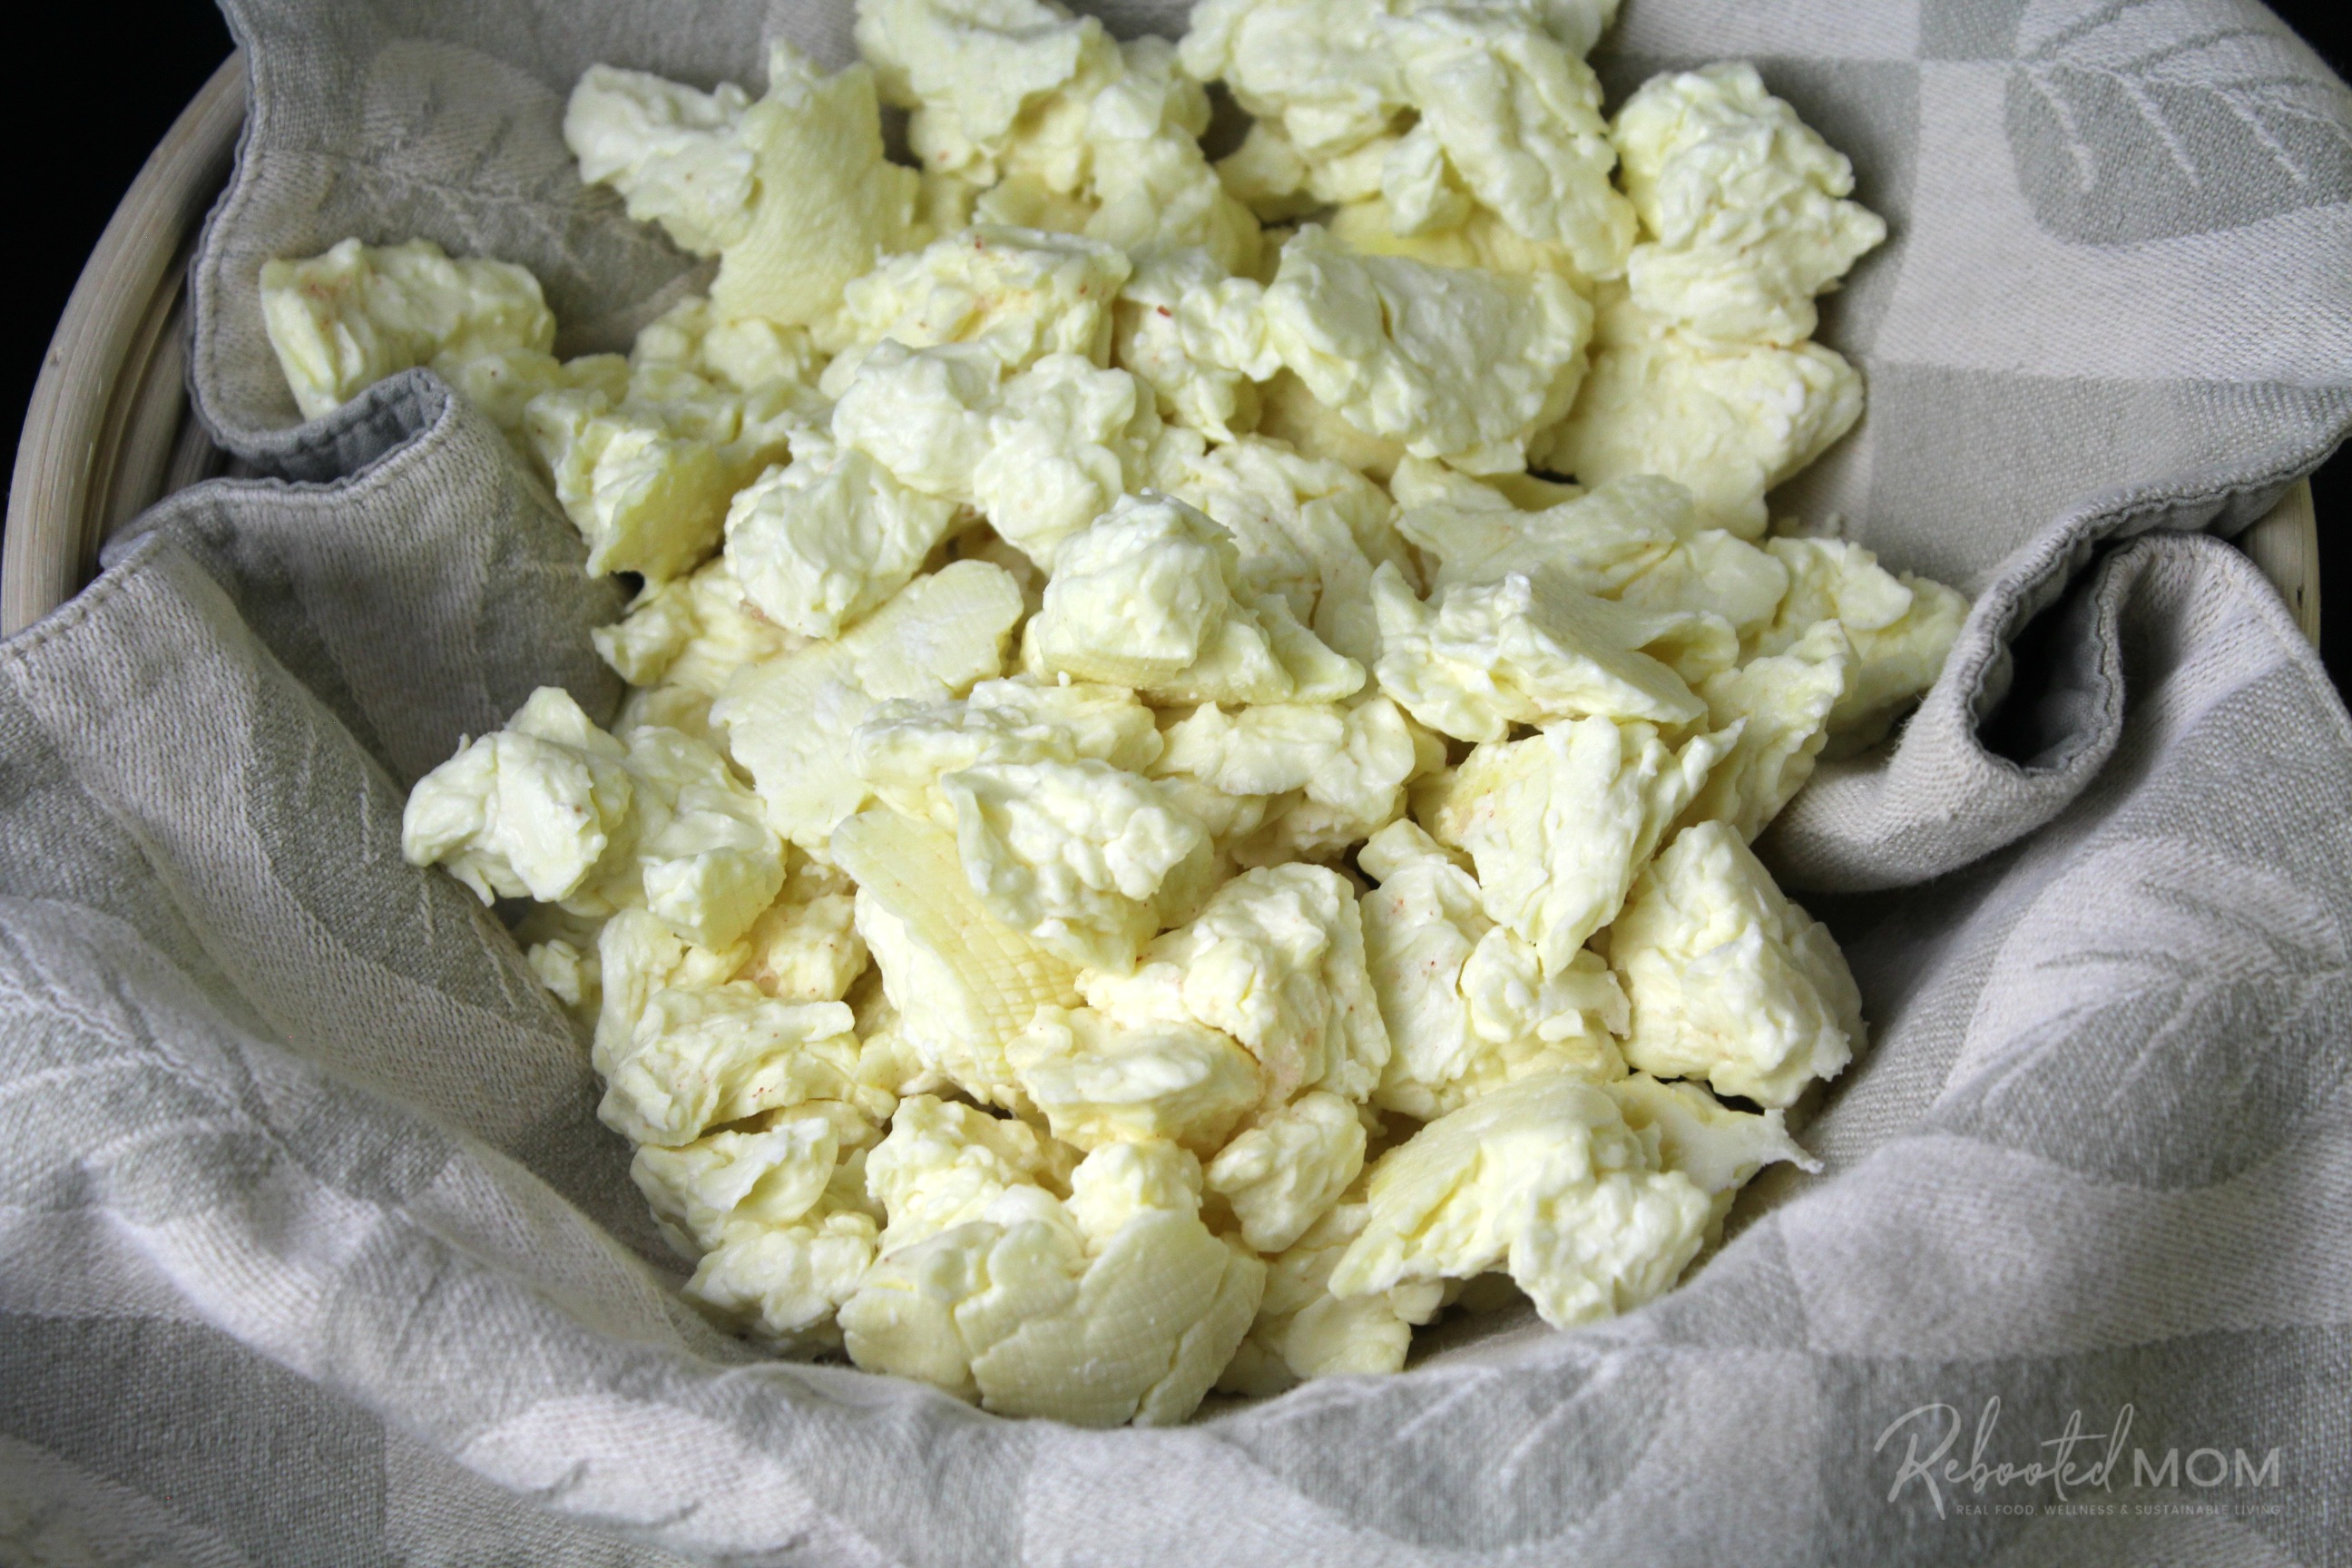 Cheese Curds: Break the curds.